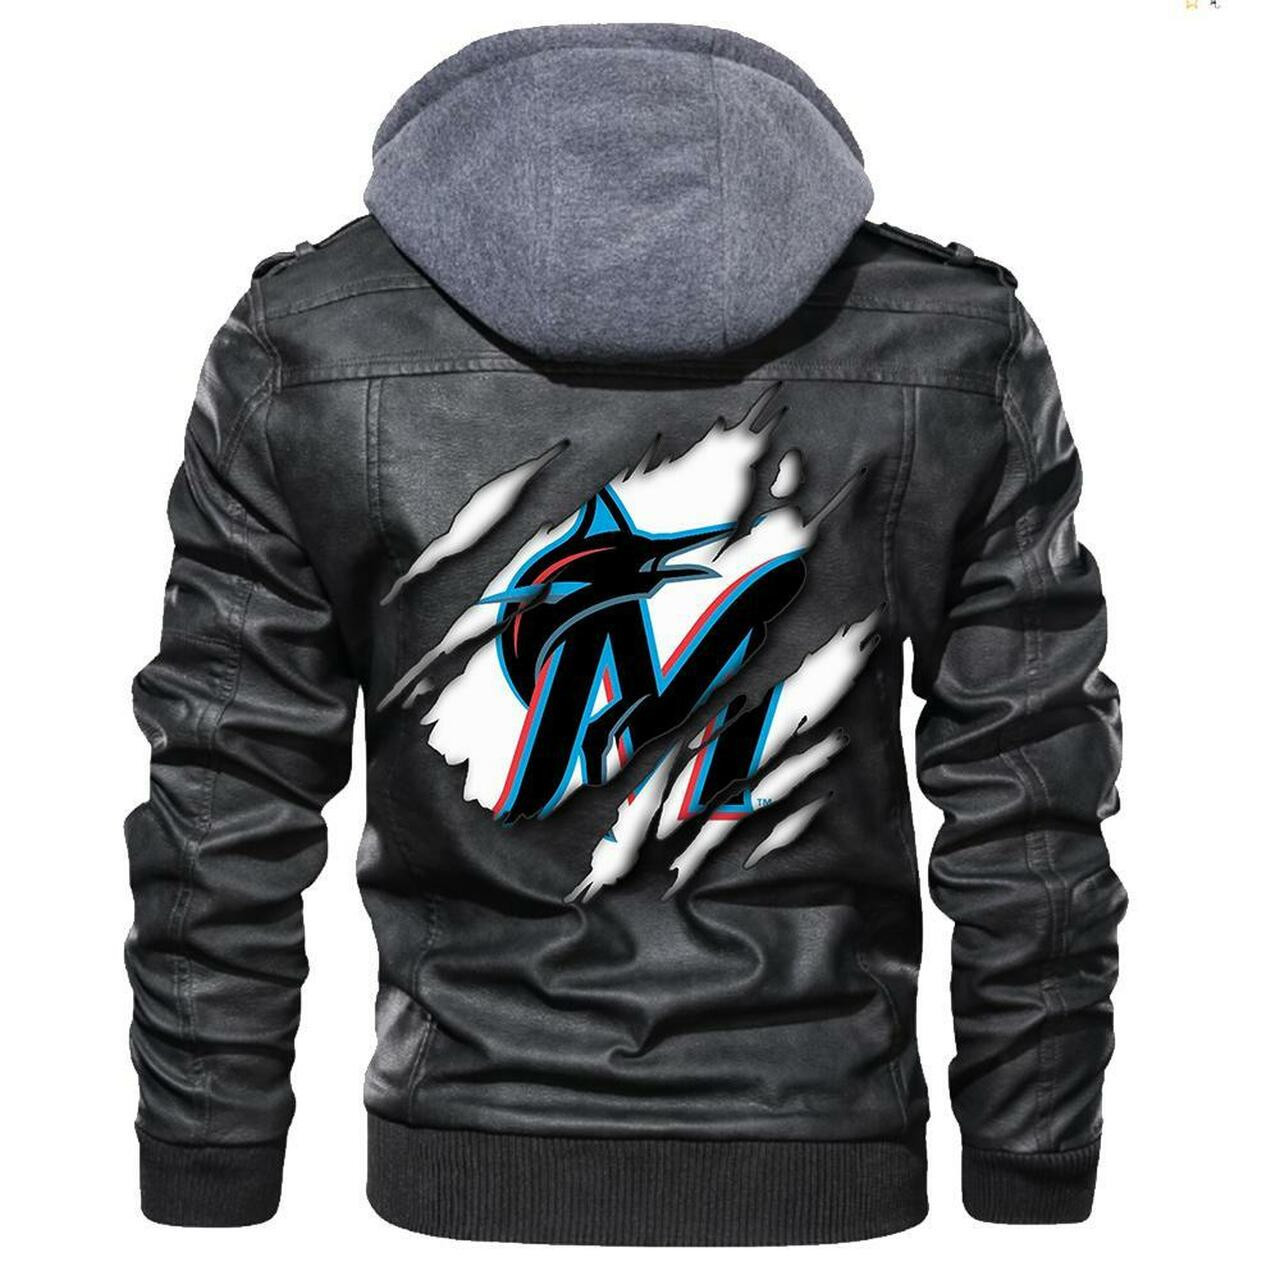 If you're looking for a trendy shirt hoodie, check out below 135